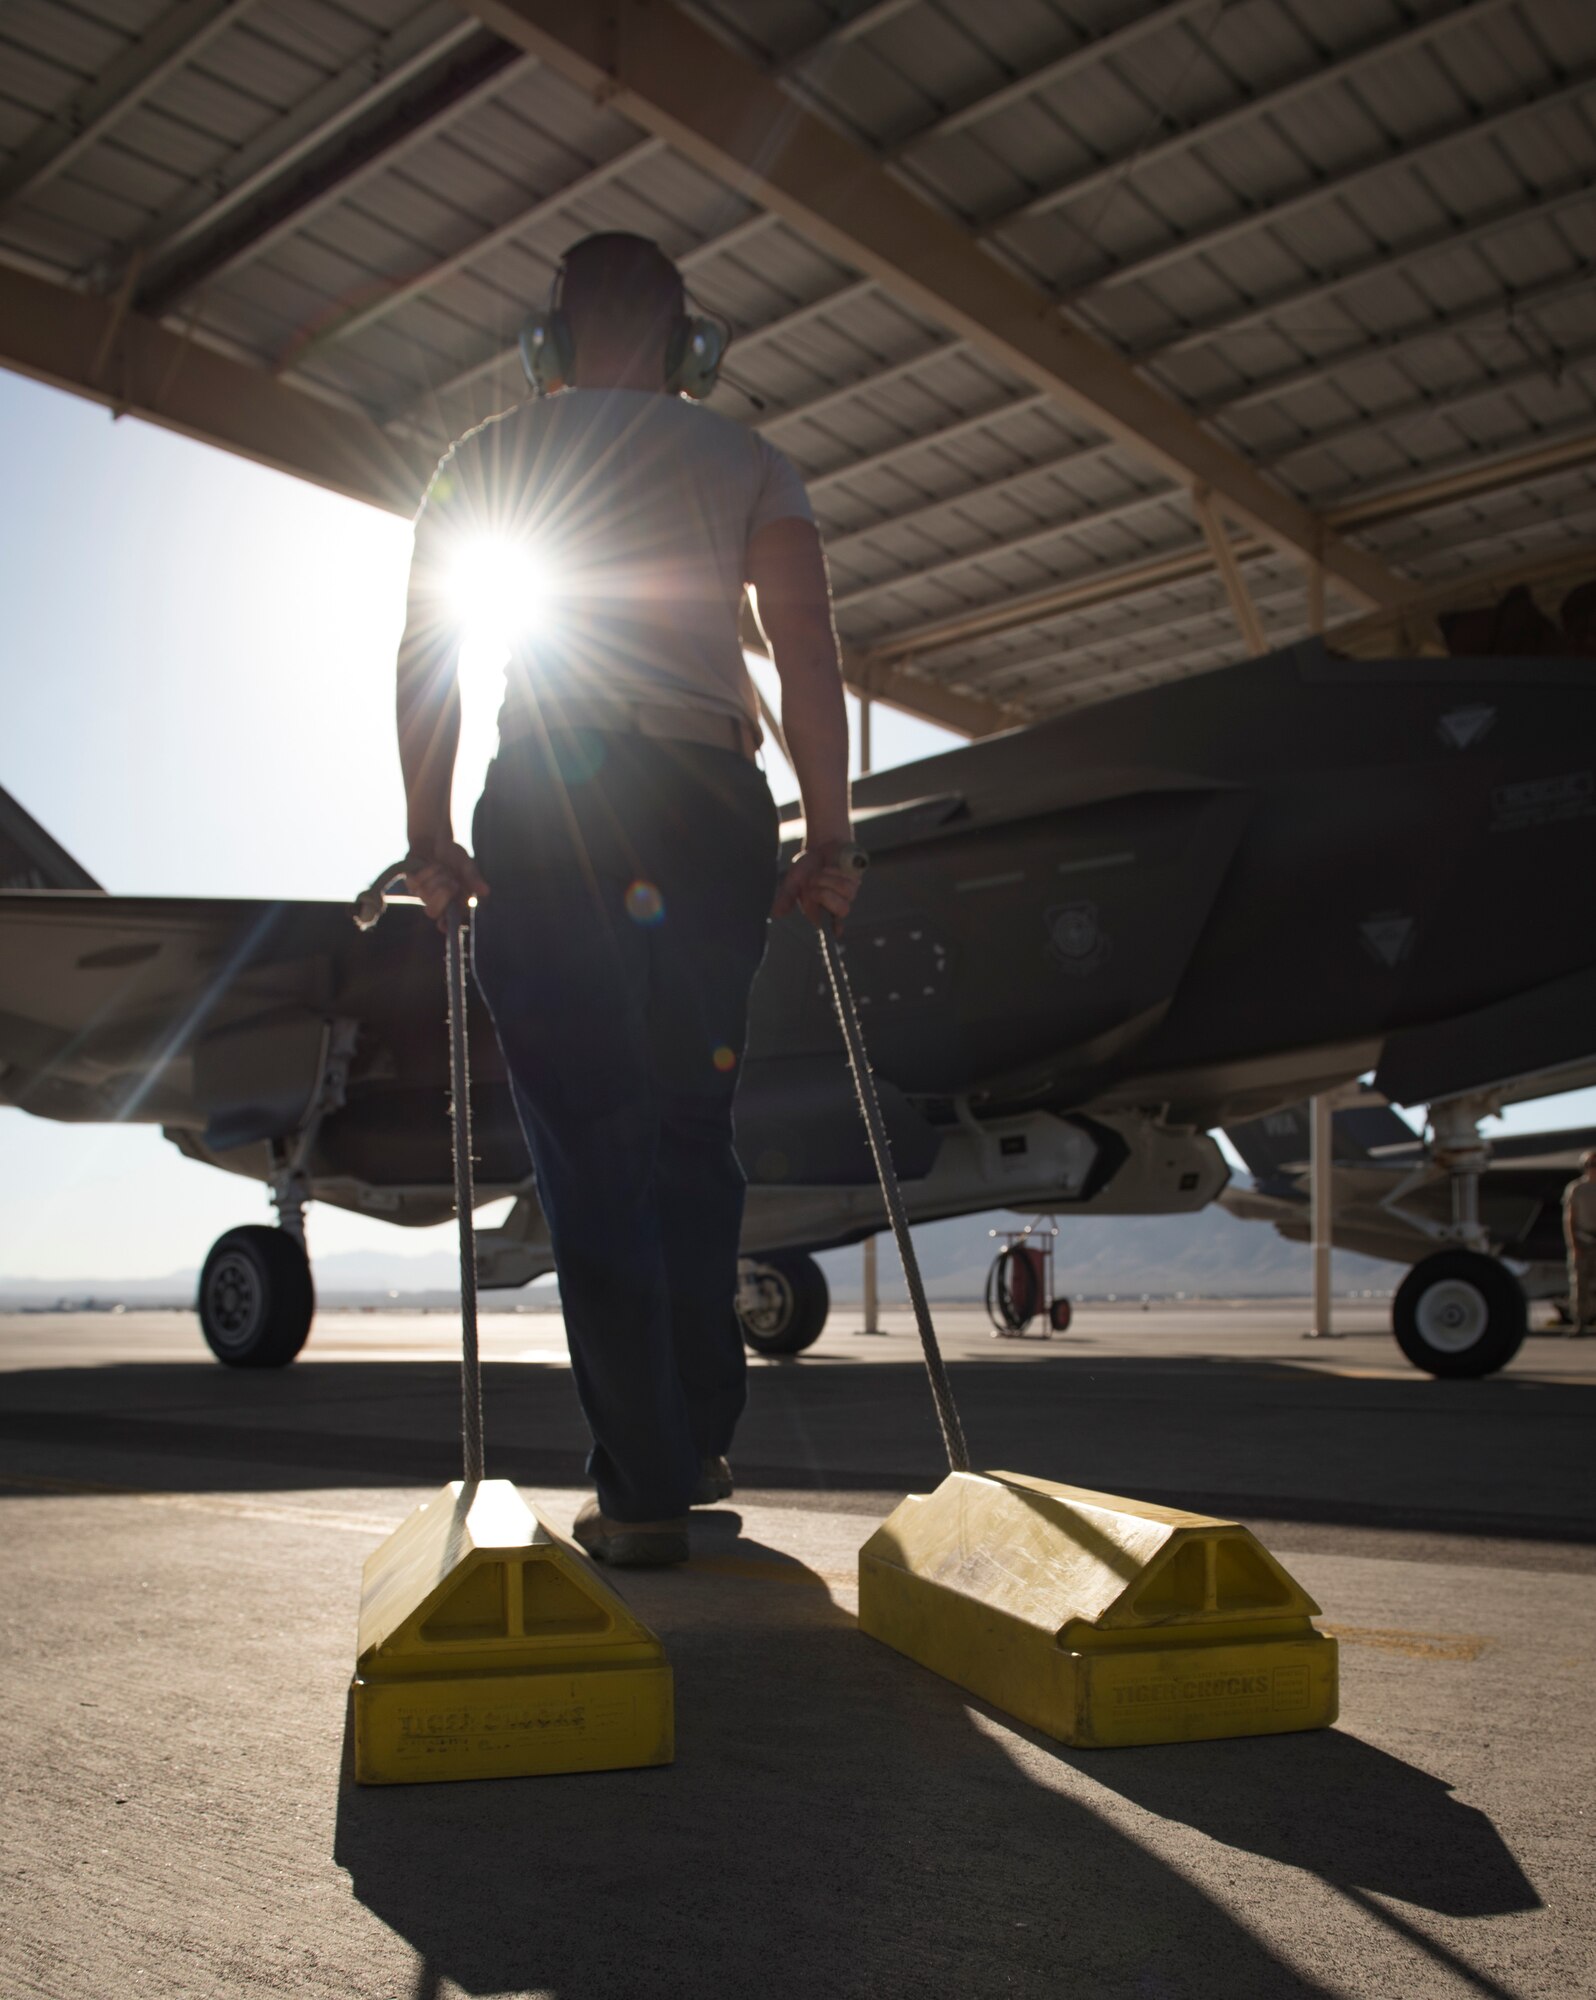 Senior Airman Dustin Hilton, 57th Aircraft Maintenance Squadron Lightning Aircraft Maintenance Unit crew chief, drags a set of chocks to an F-35A Lightning II fighter jet at Nellis Air Force Base, Nevada, July 23, 2018. Placing chocks under the tires of an aircraft prevents it from moving until the pilot is ready to taxi the aircraft to the runway. (U.S. Air Force photo by Airman 1st Class Andrew D. Sarver)